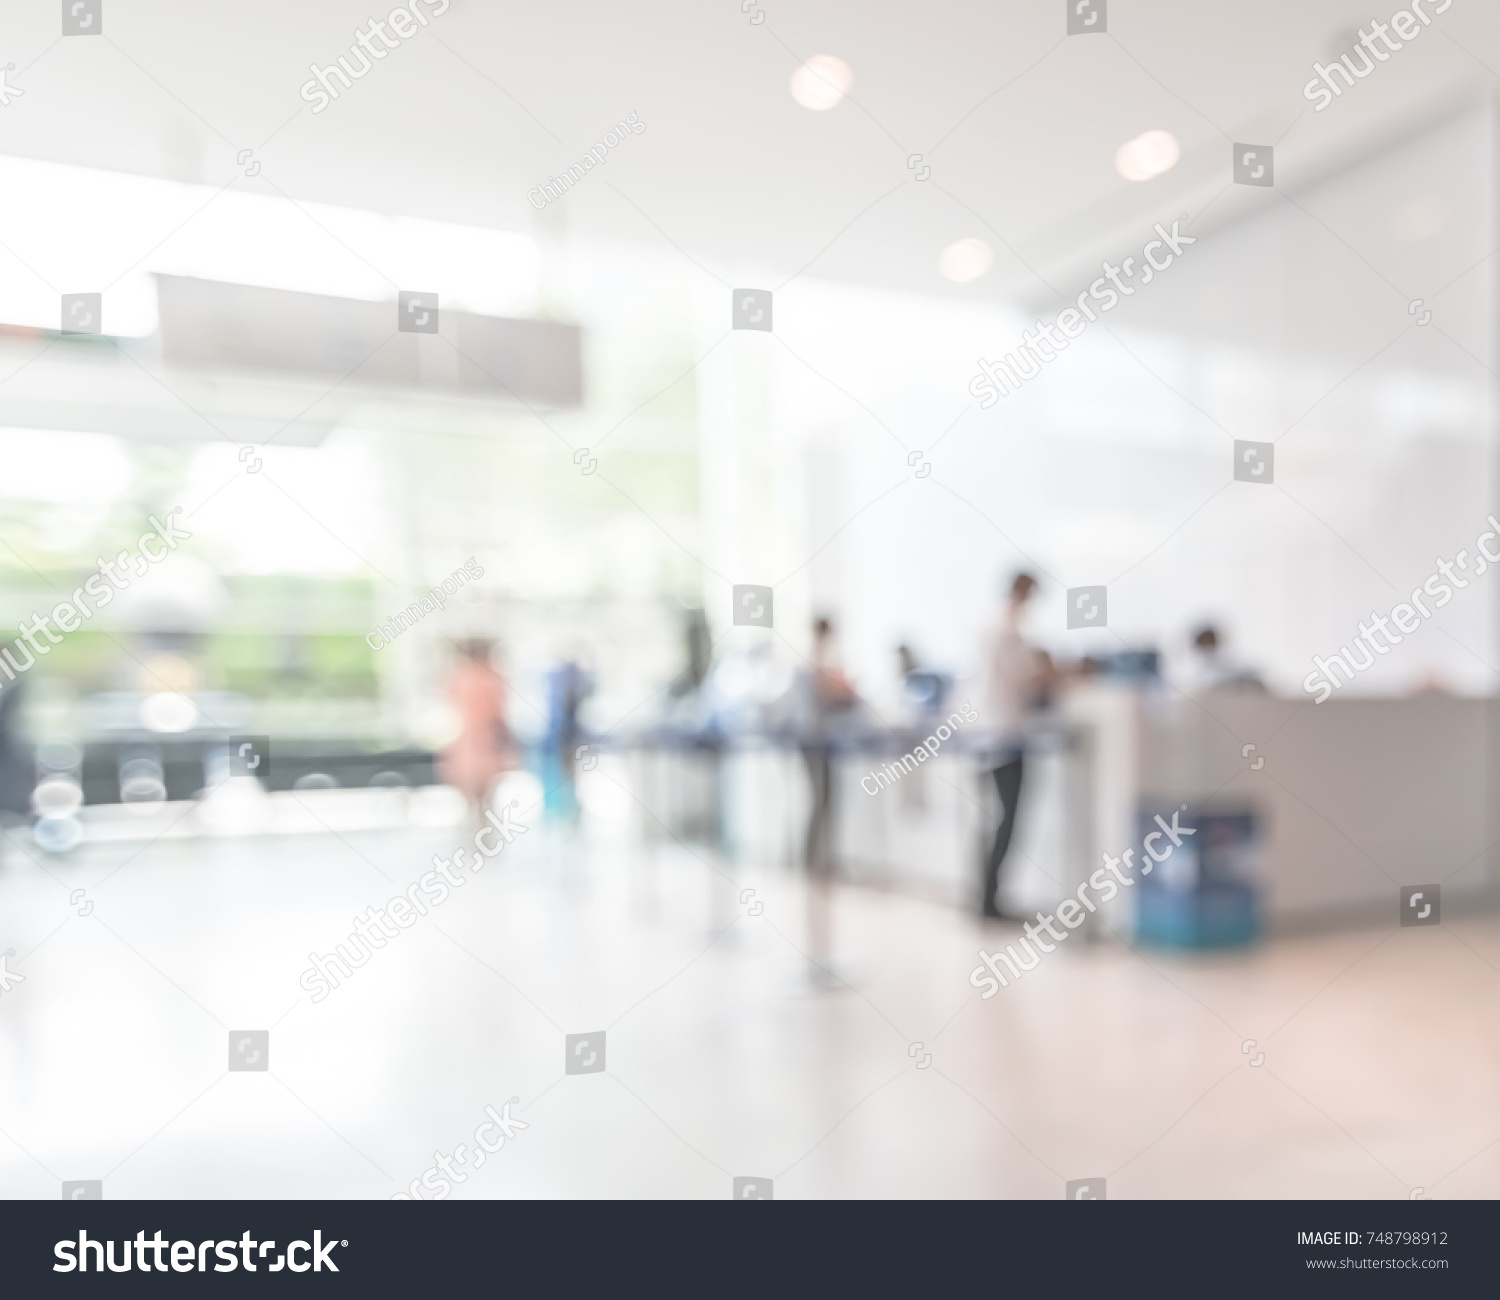 Business office building lobby blur background of bank reception hall customer or patient counter service and cashier desk inside blurry hospital, office or hotel waiting hall #748798912